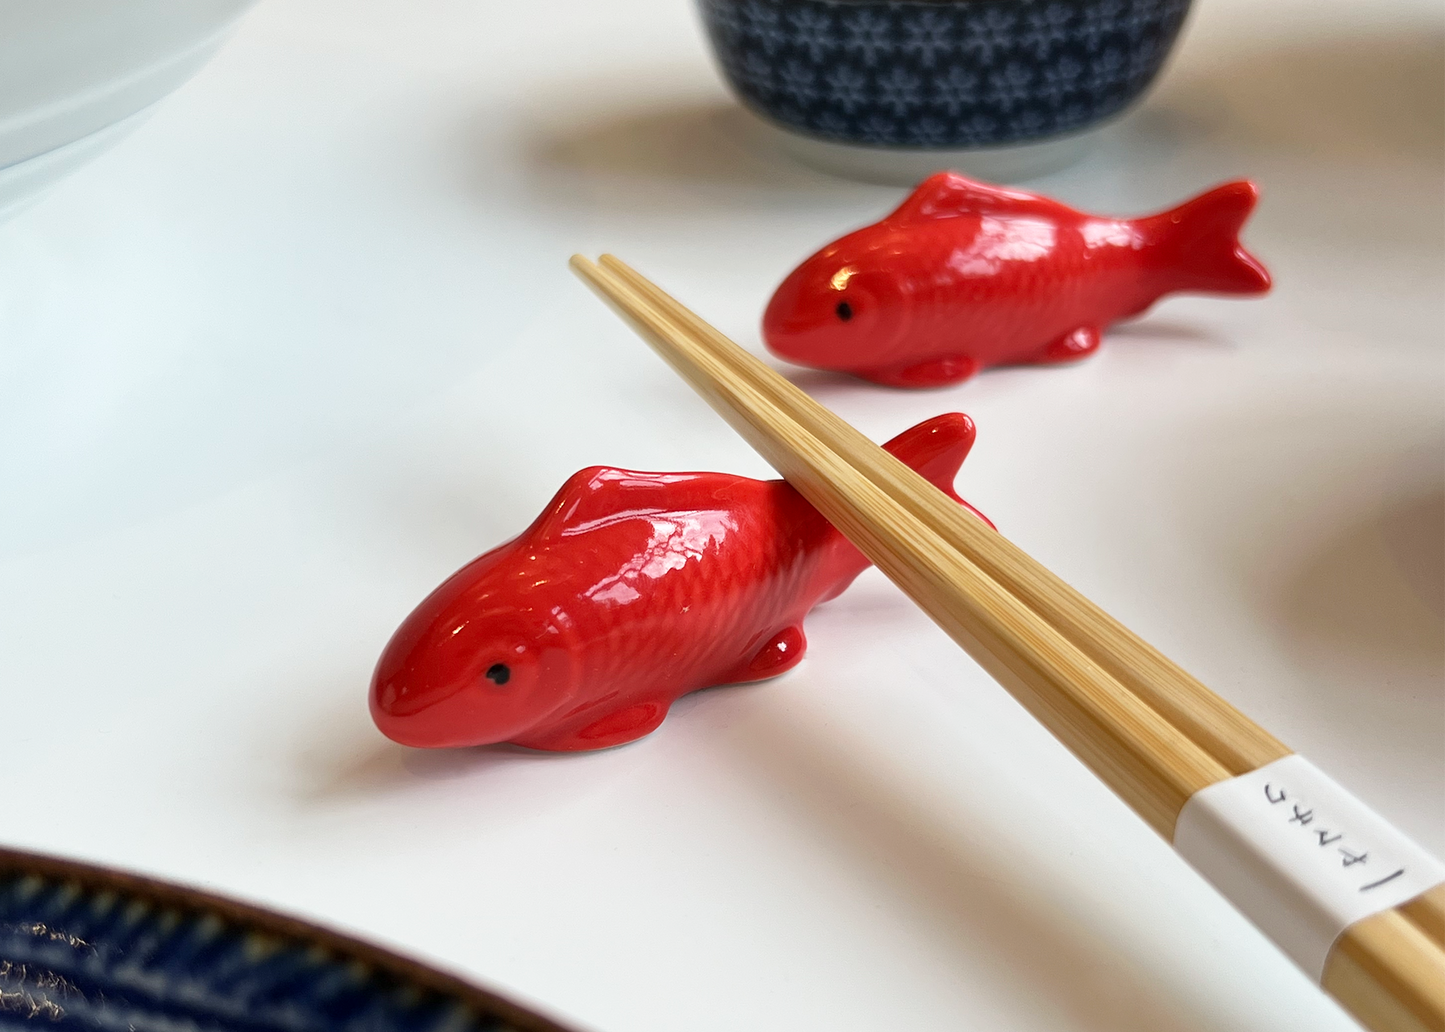 Chopsticks resting on the bright red ceramic koi fish chopstick rest as sold by Woodland Mod